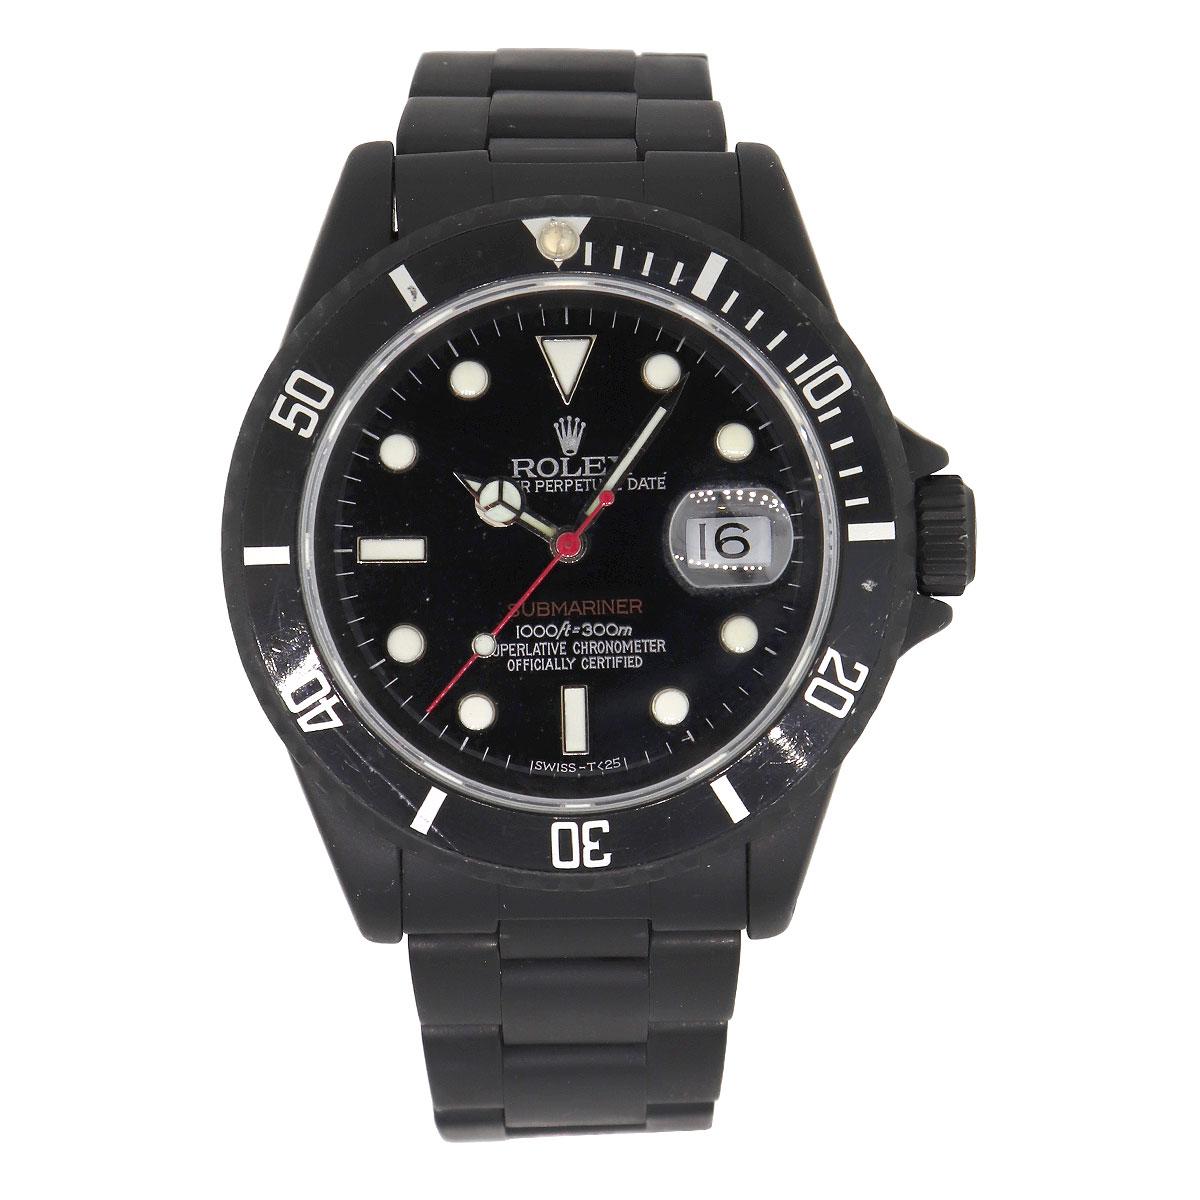 Brand: Rolex
MPN: 16610
Model: Submariner
Case Material: Stainless Steel PVD Coated
Case Diameter: 40mm
Crystal: Sapphire crystal
Bezel: Black Stainless Steel bezel. Scratches can be seen alongside the bezel, please refer to pictures for